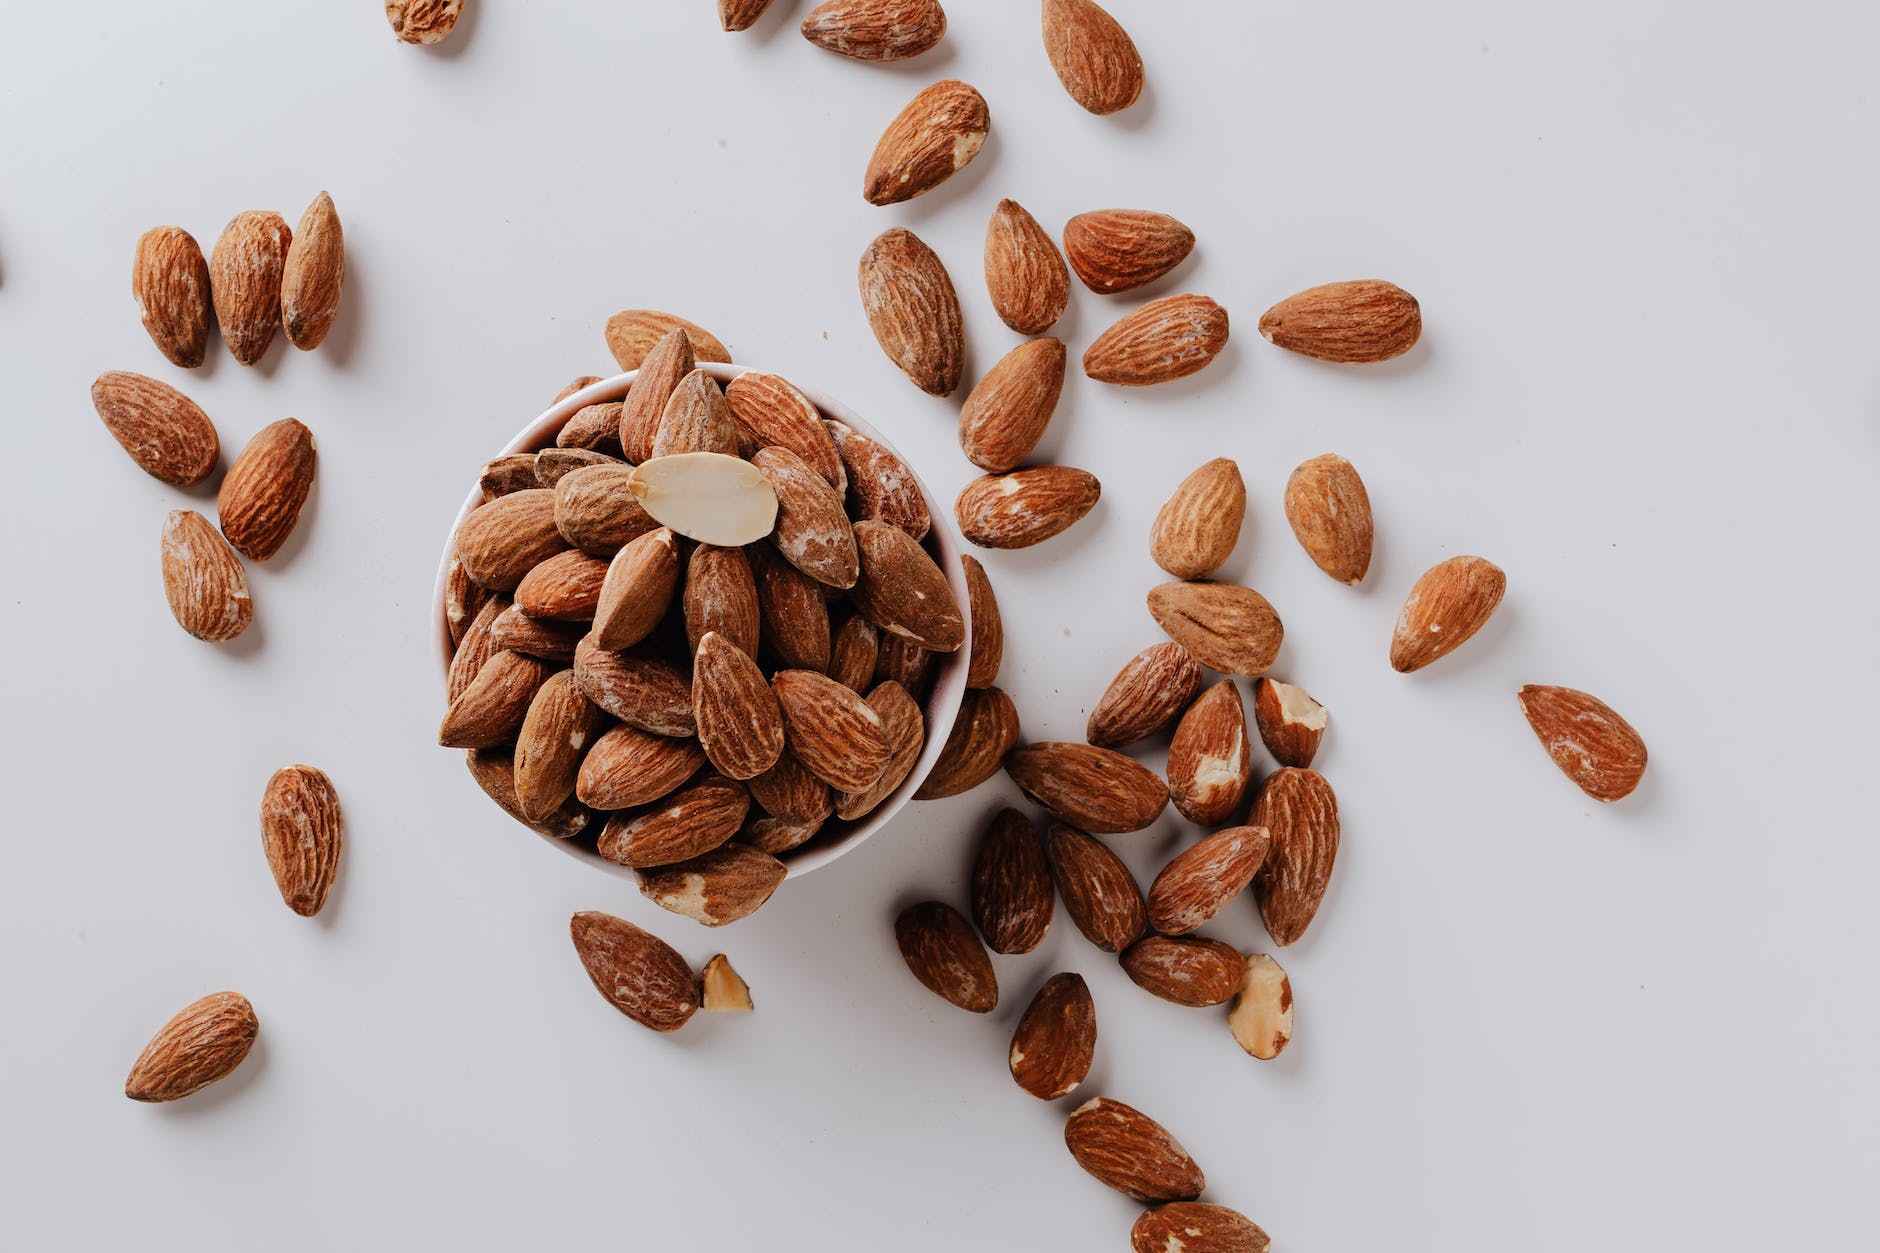 bowl filled with raw almond nuts on white background Photo by Karolina Grabowska on Pexels.com